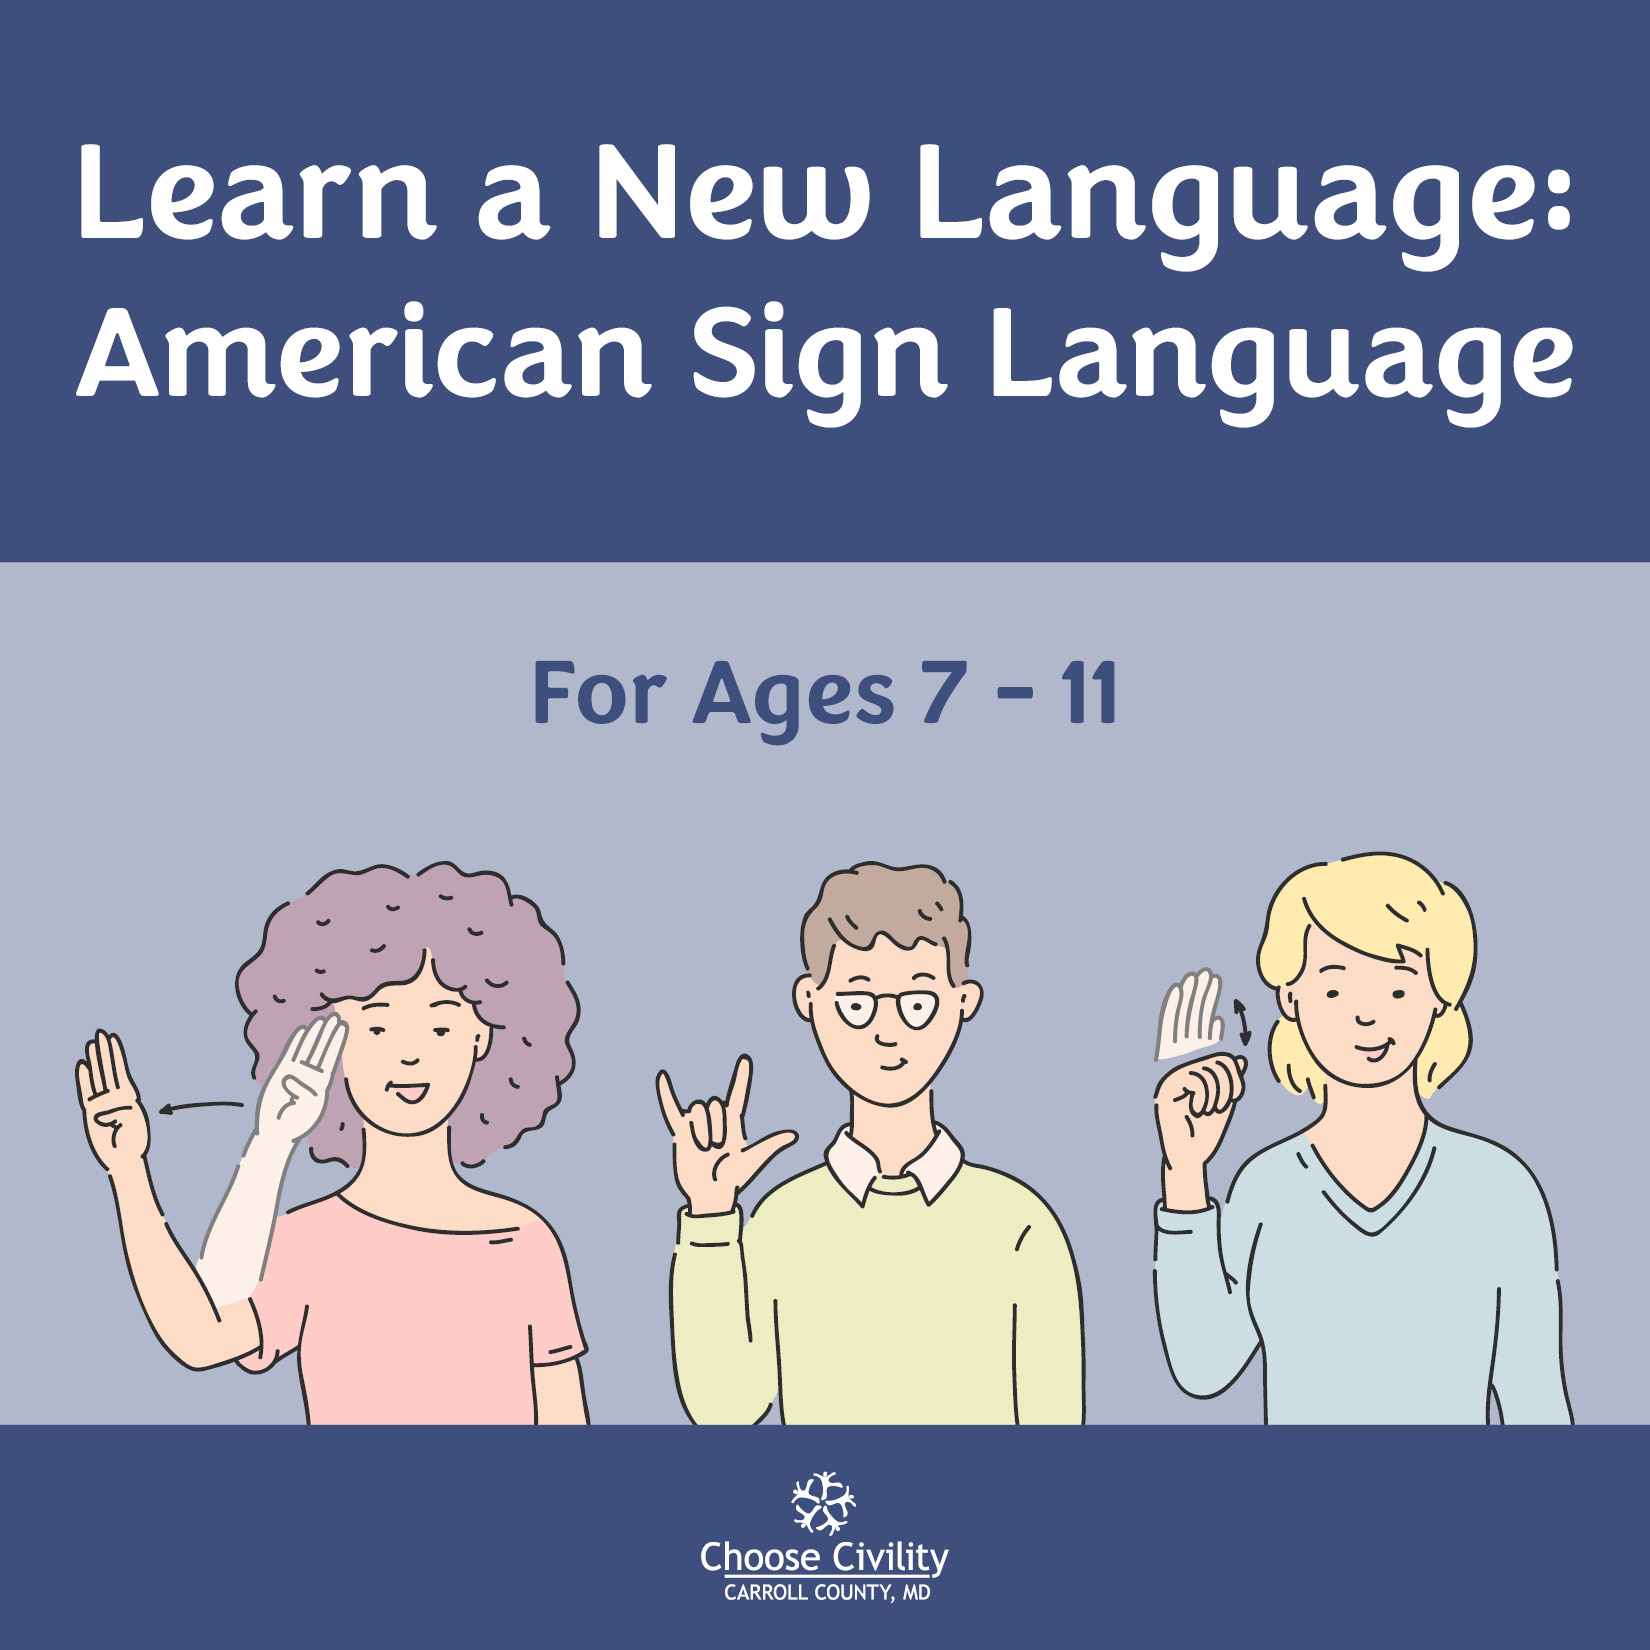 Learn a New Language: American Sign Language